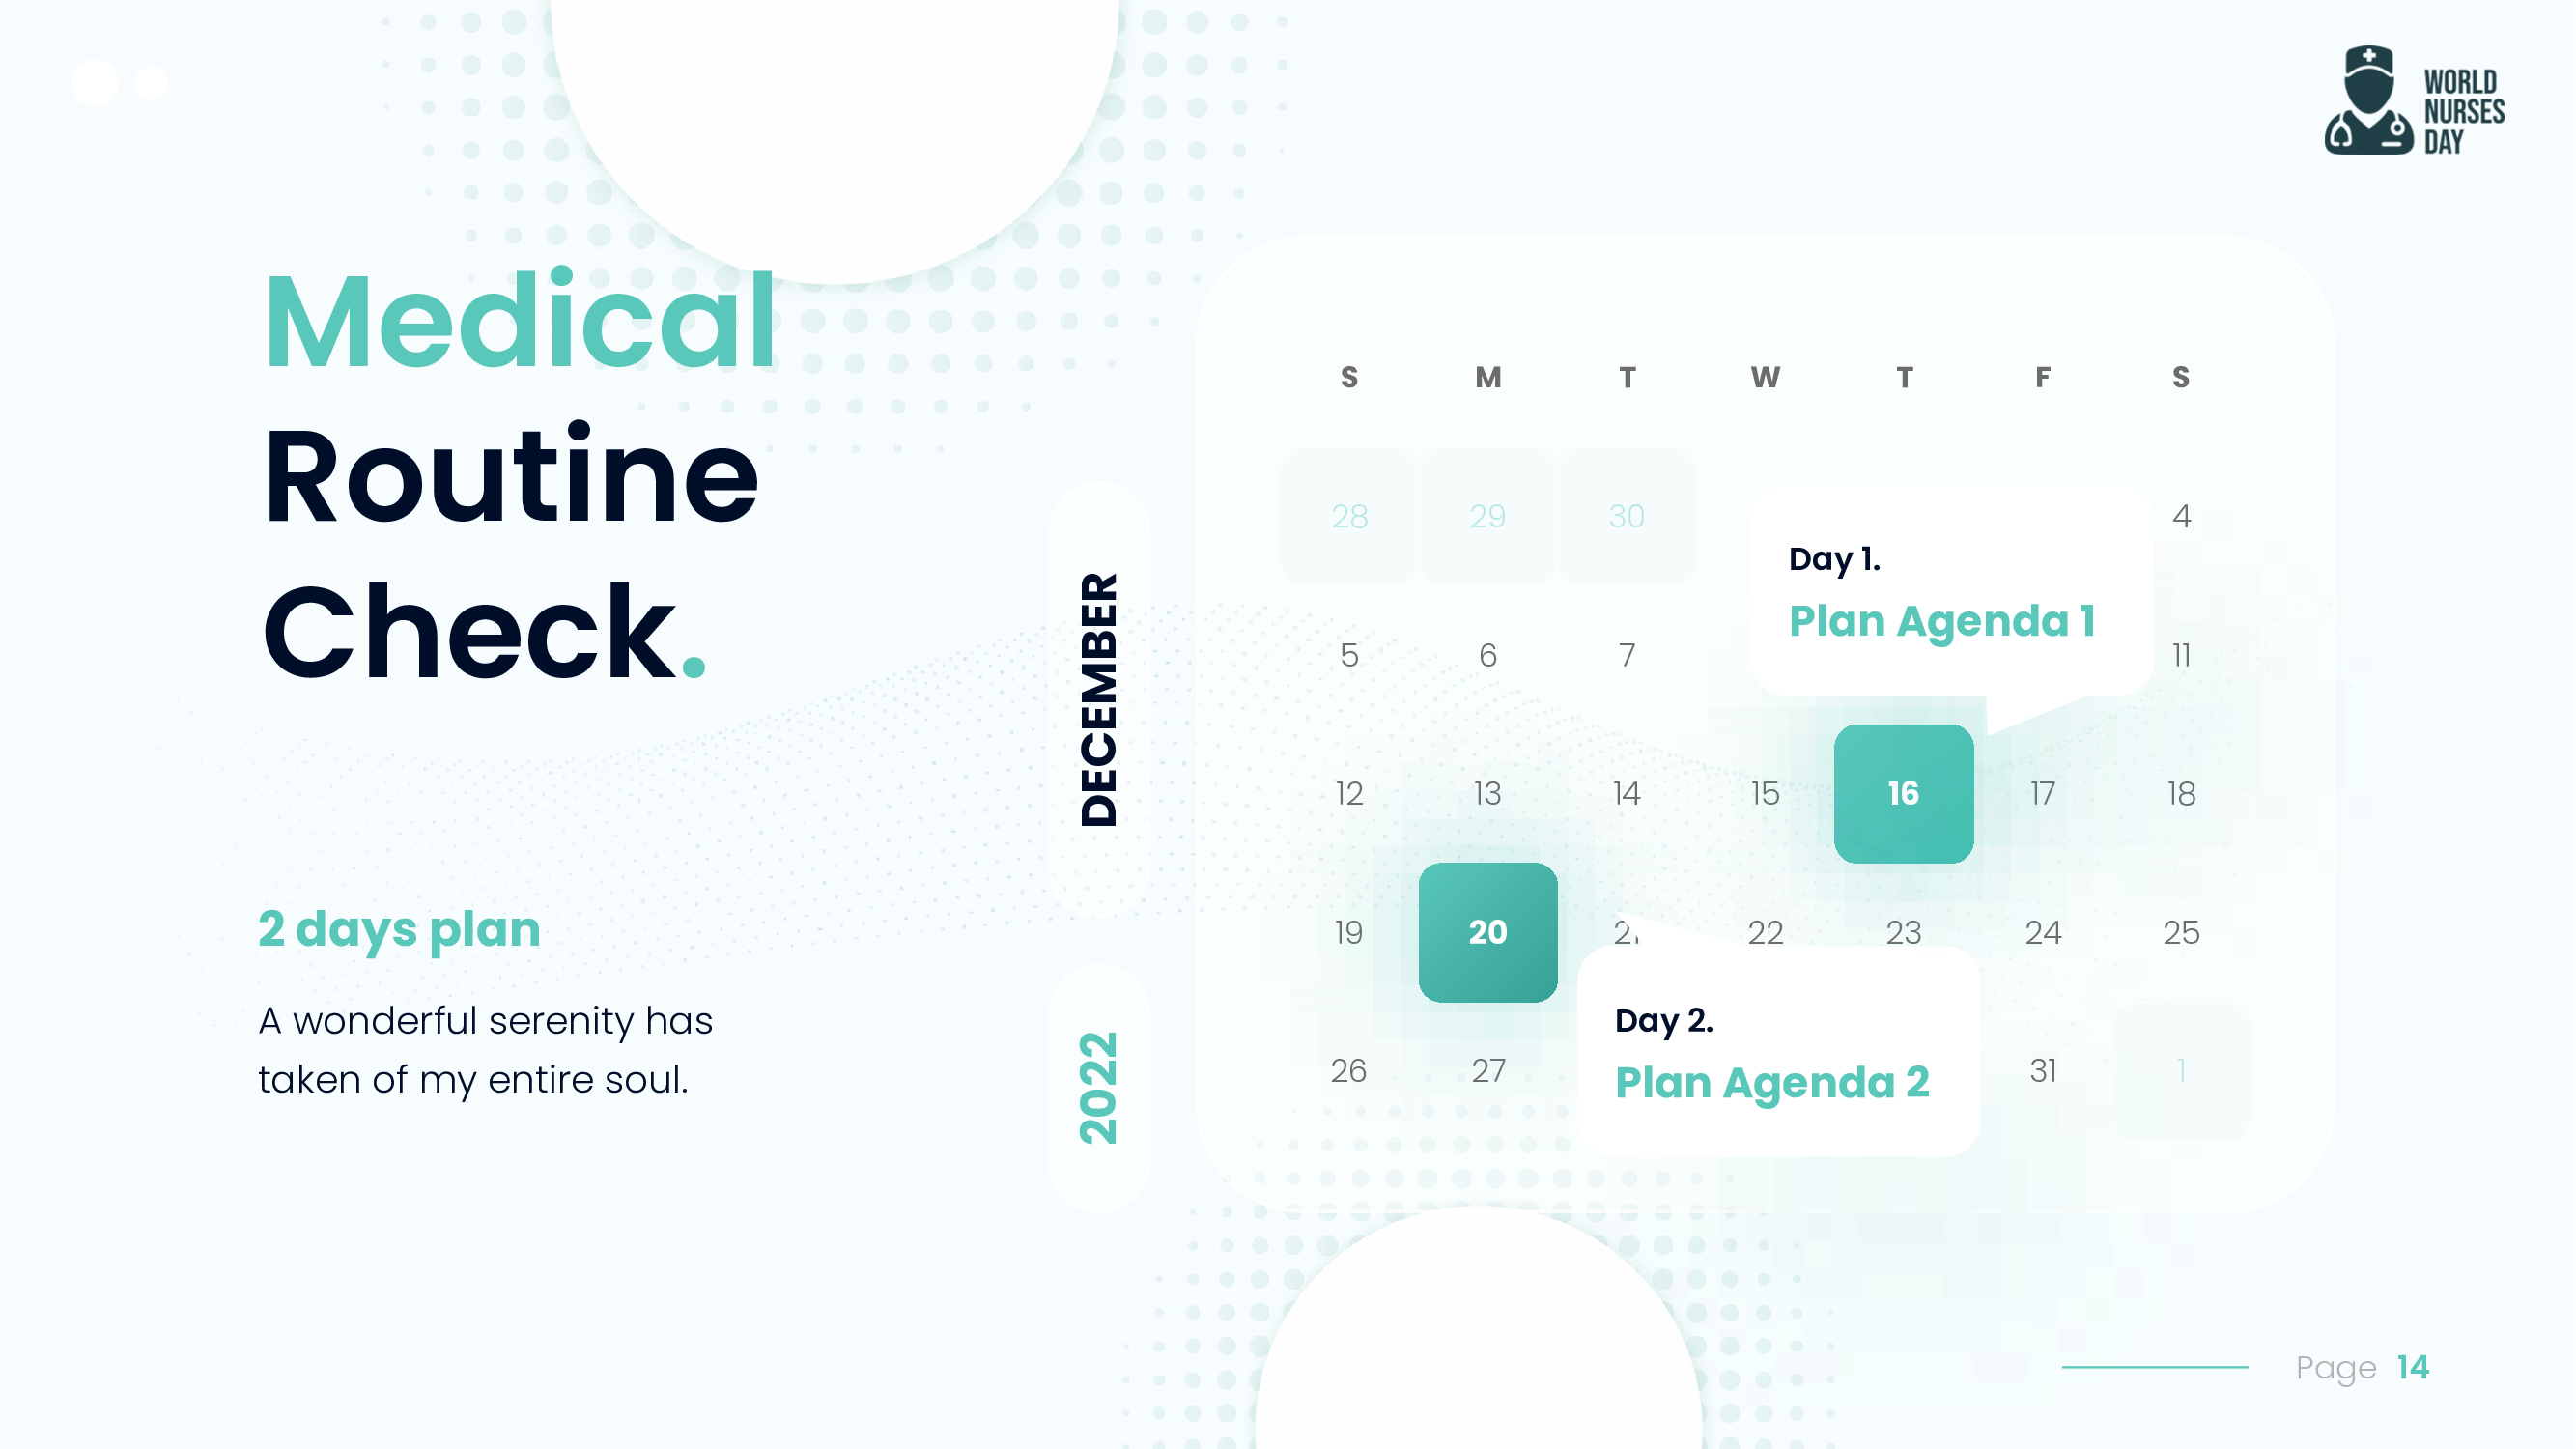 Create your own medical routine check.